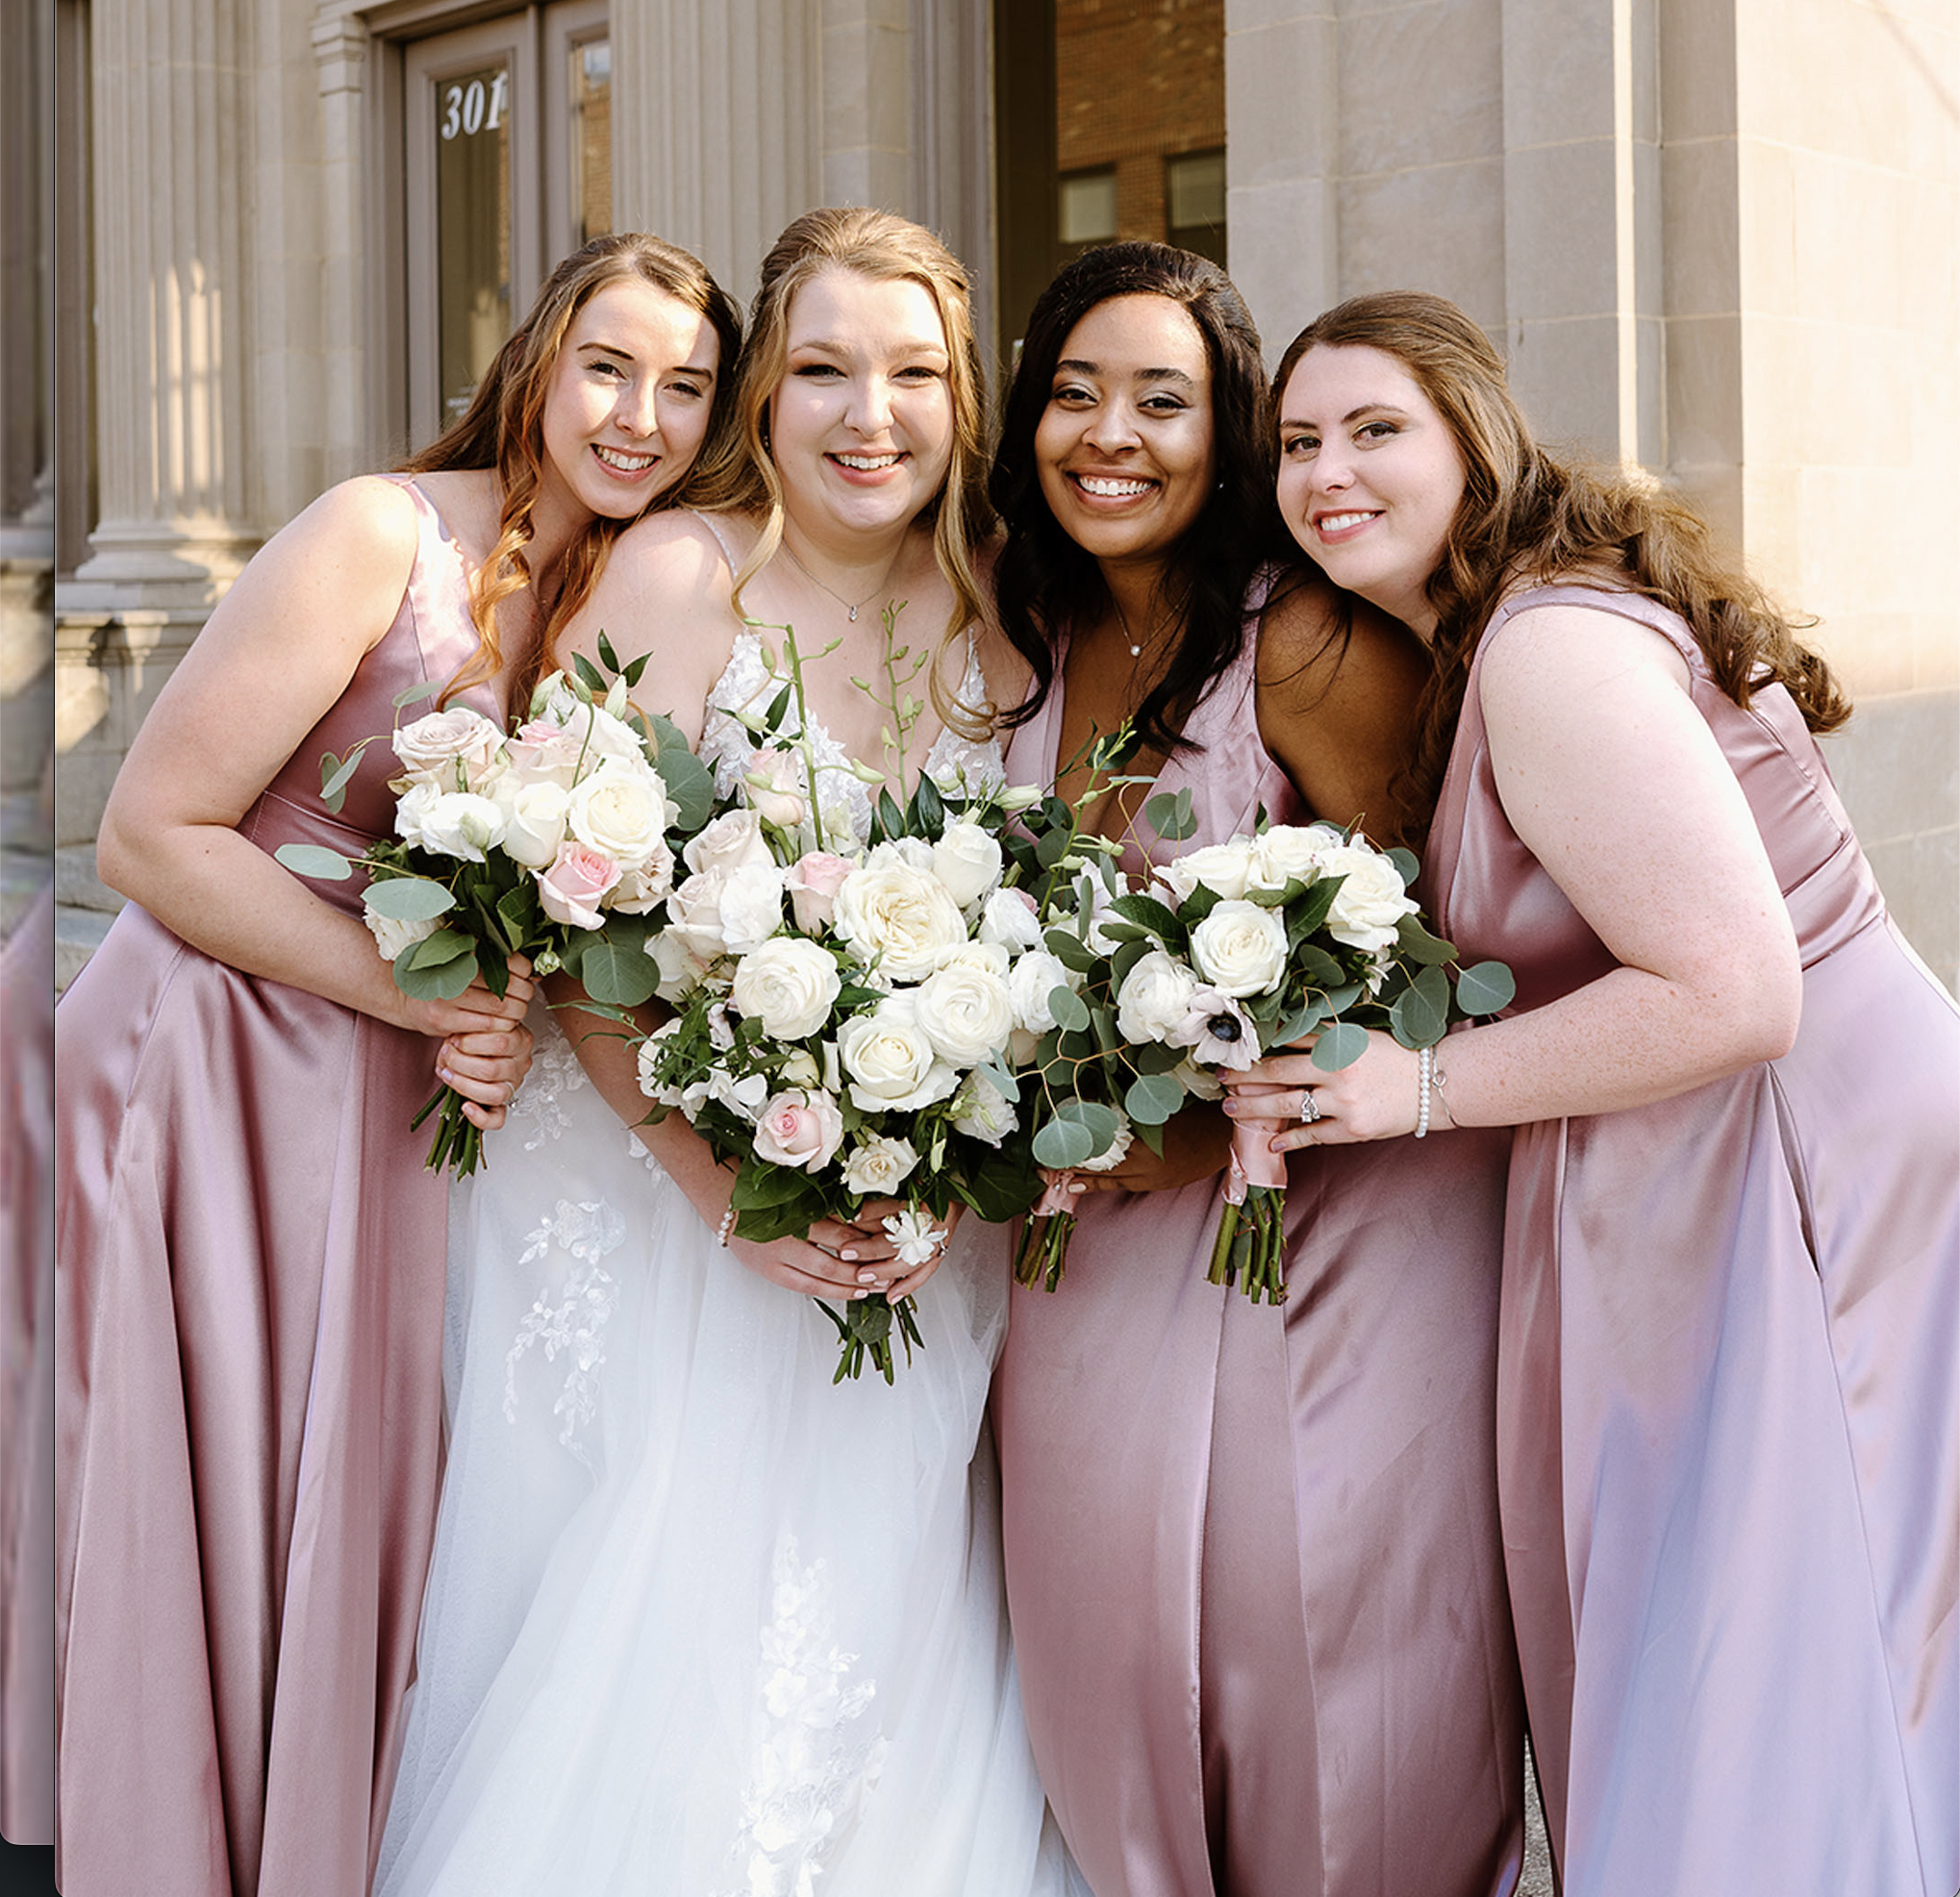 The Best Bridesmaid Gift Ideas